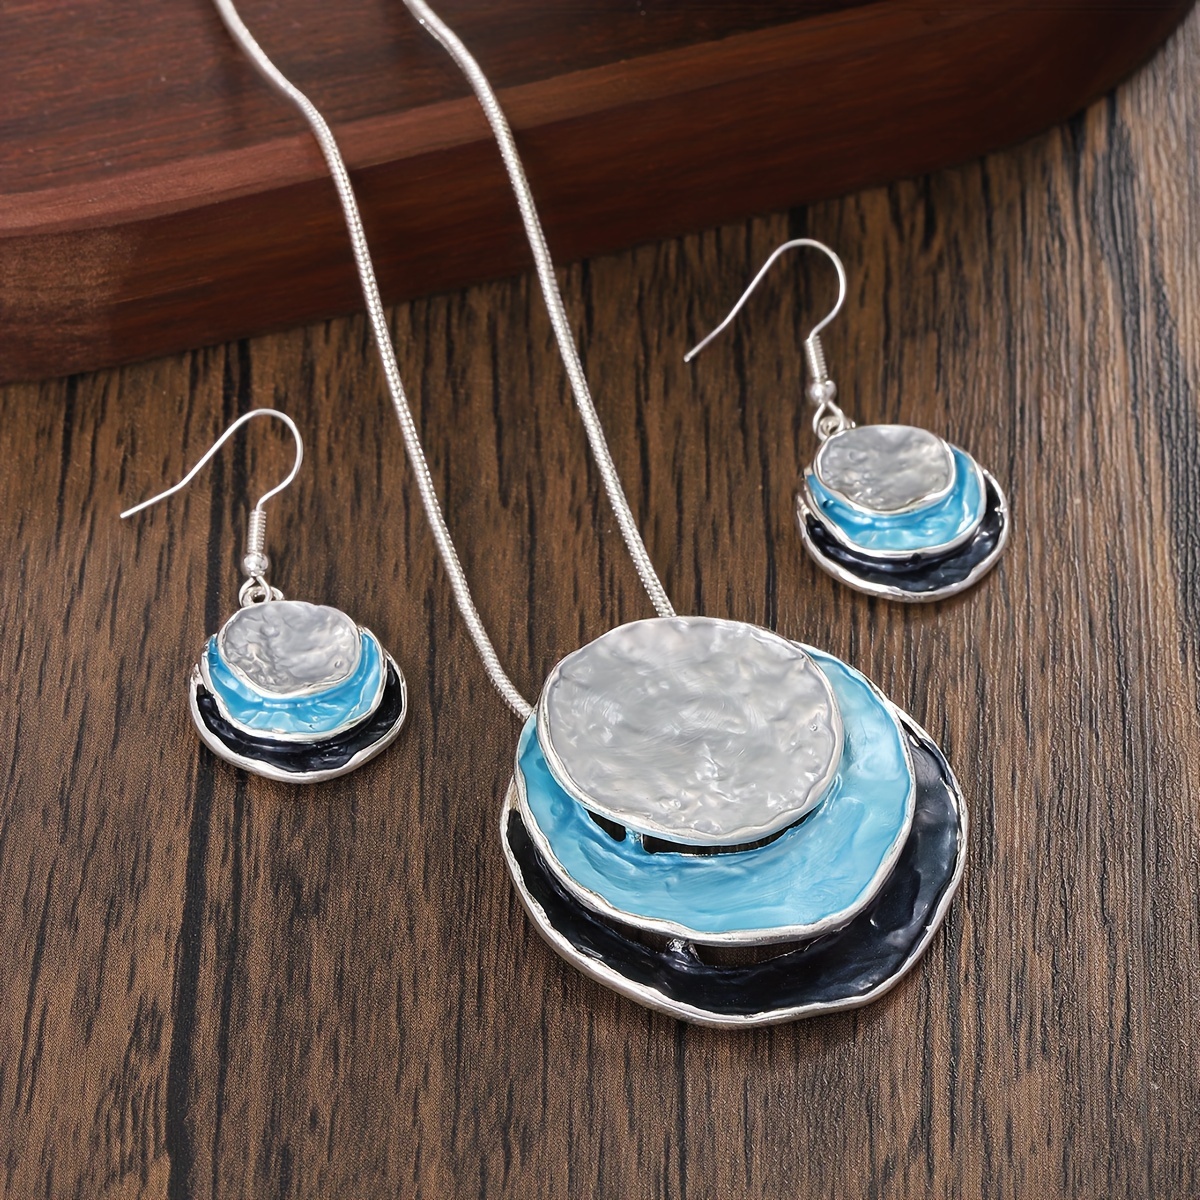 

Drop Earrings + Necklace Bohemian Jewelry Set Irregular Disc Design Pick A Color U Prefer Match Daily Outfits Party Accessories